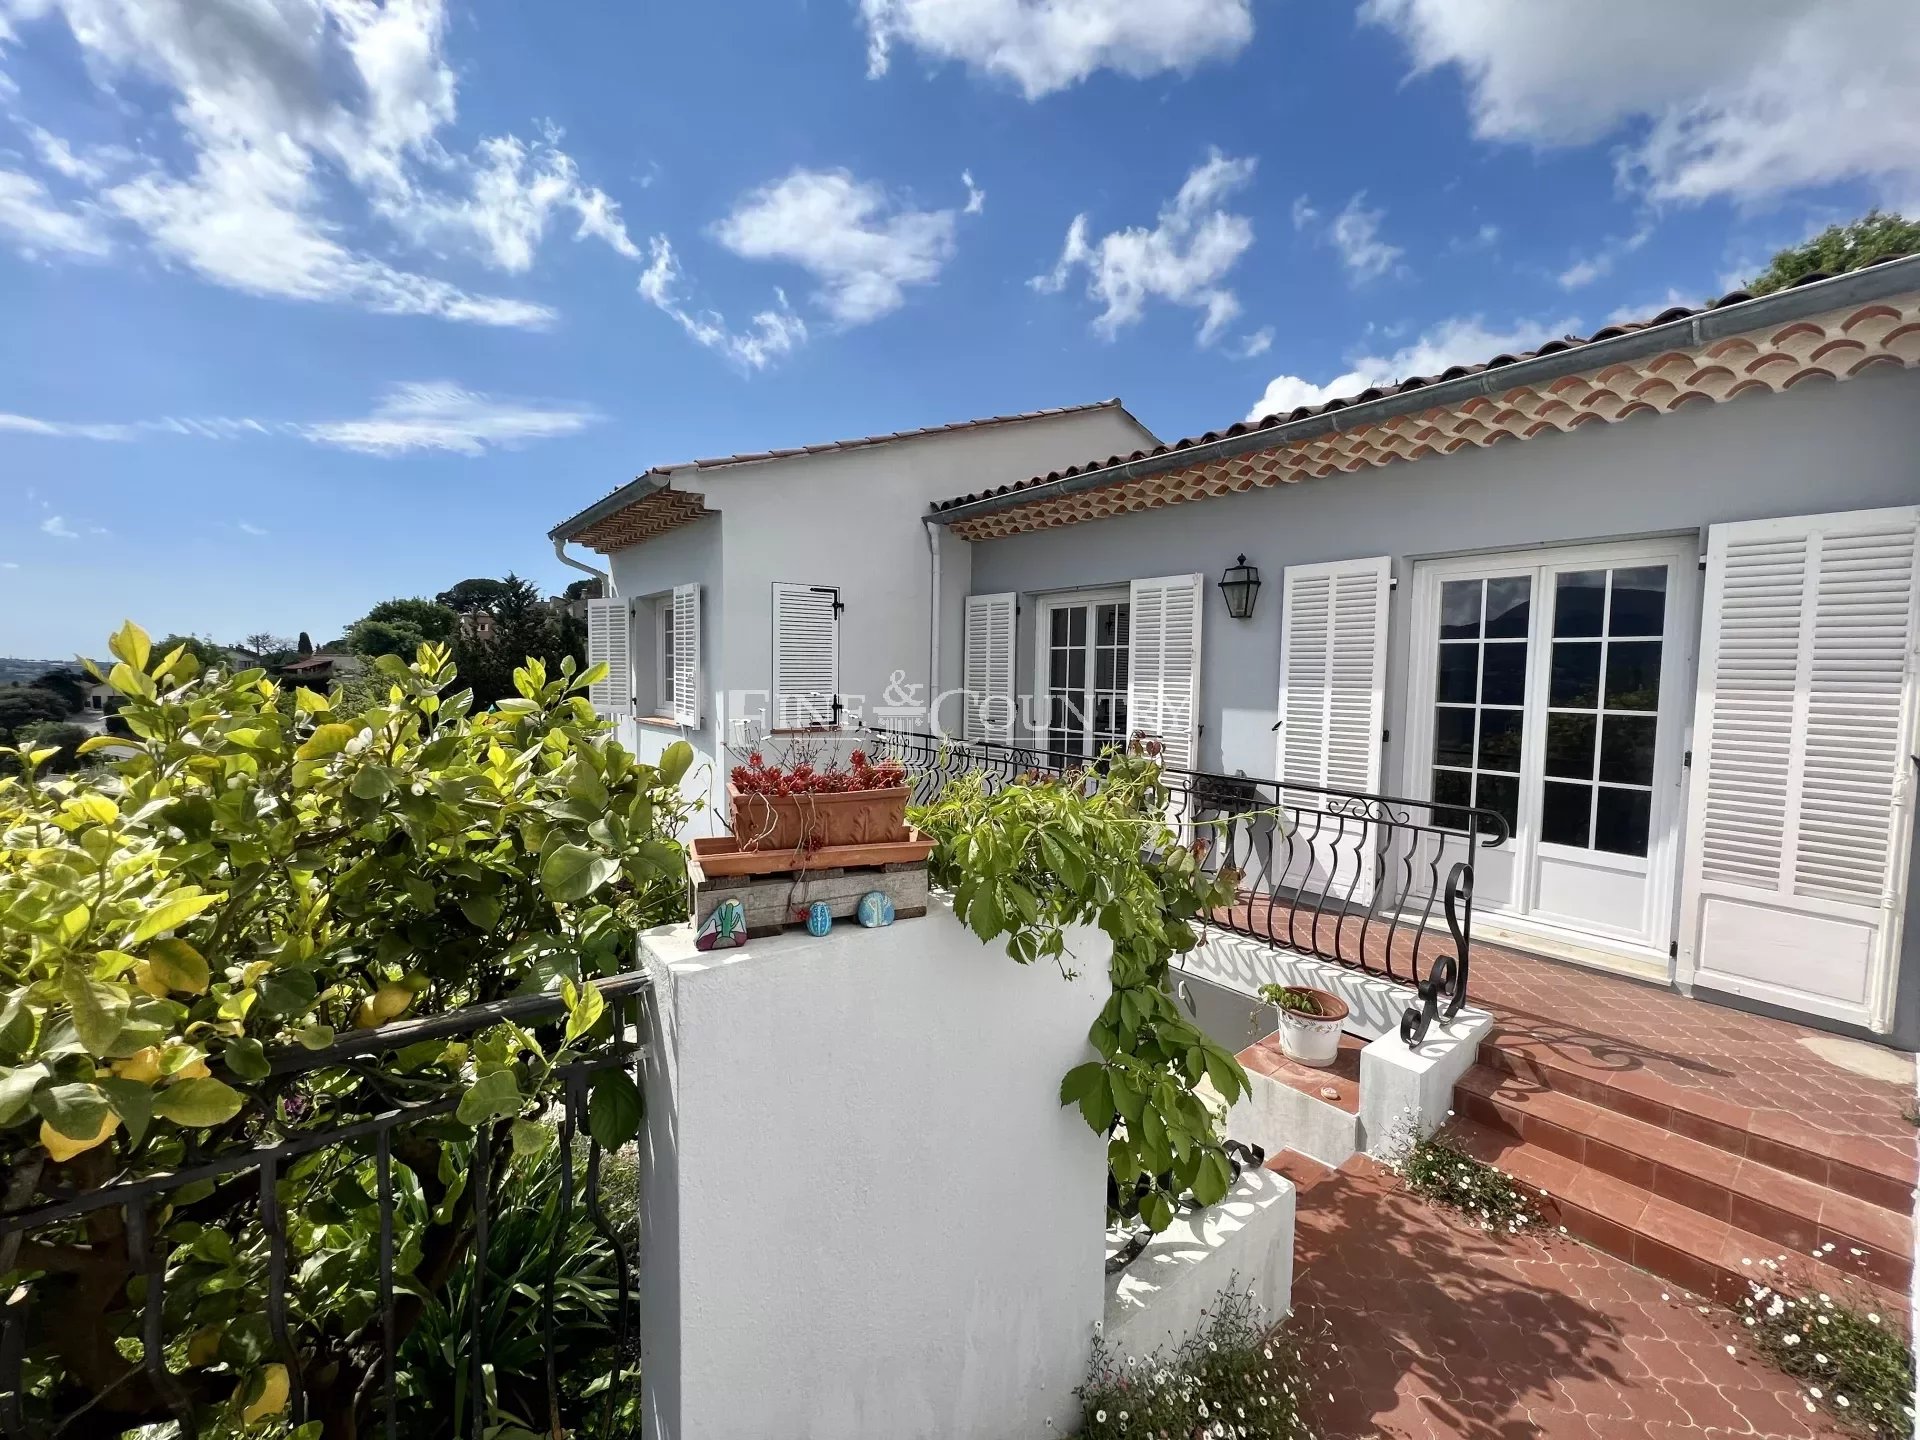 Photo of Villa for sale in Gattières with panoramic view